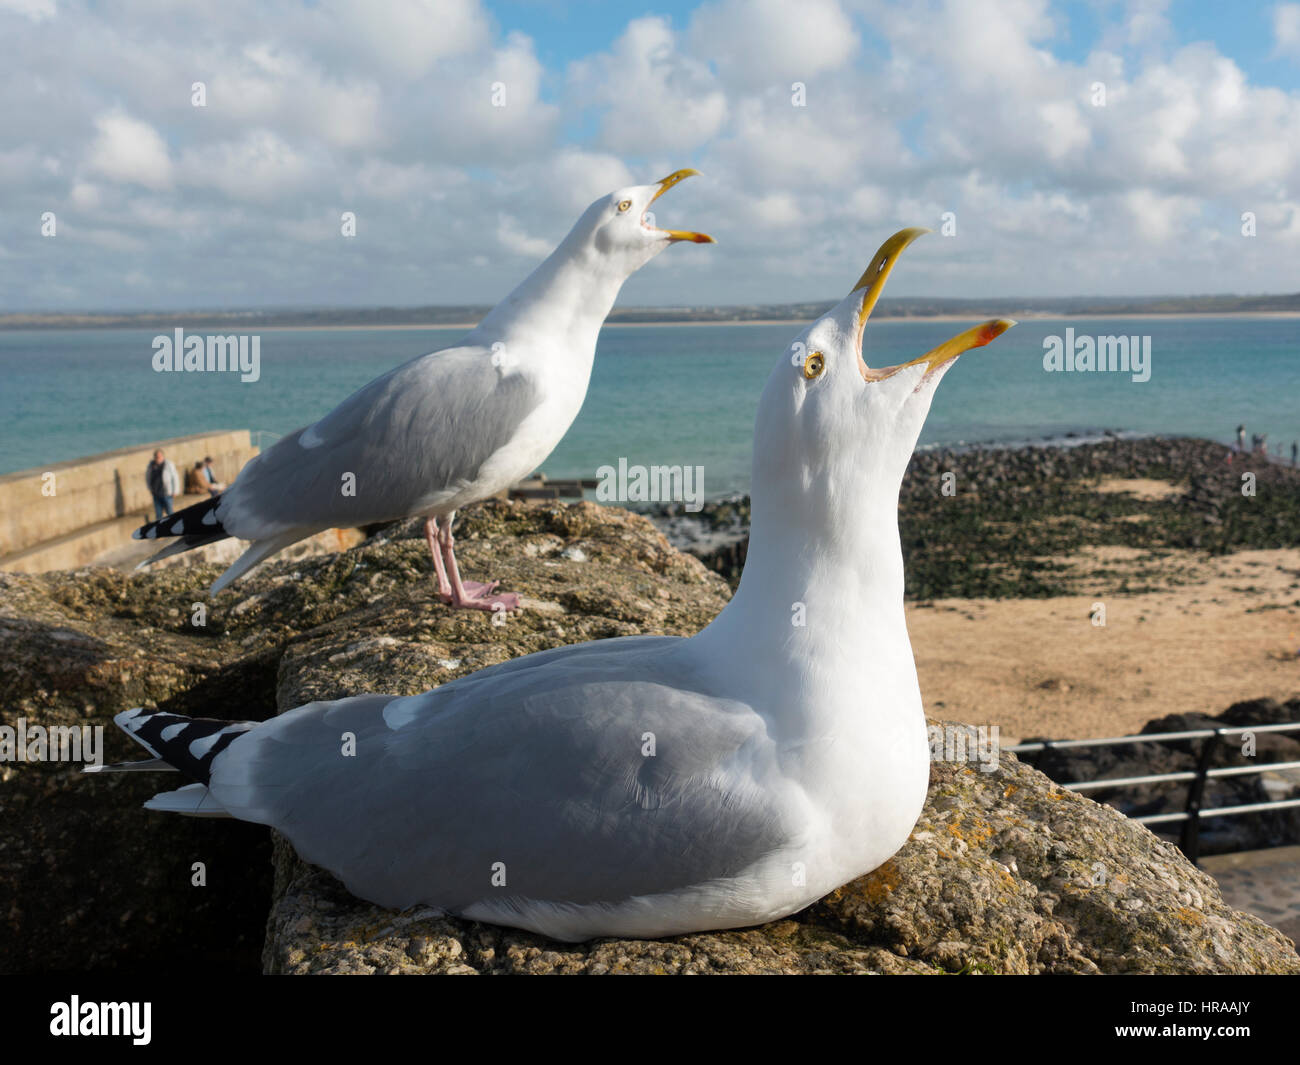 Two seagulls squawking noisily in St. Ives, Cornwall England UK. Stock Photo